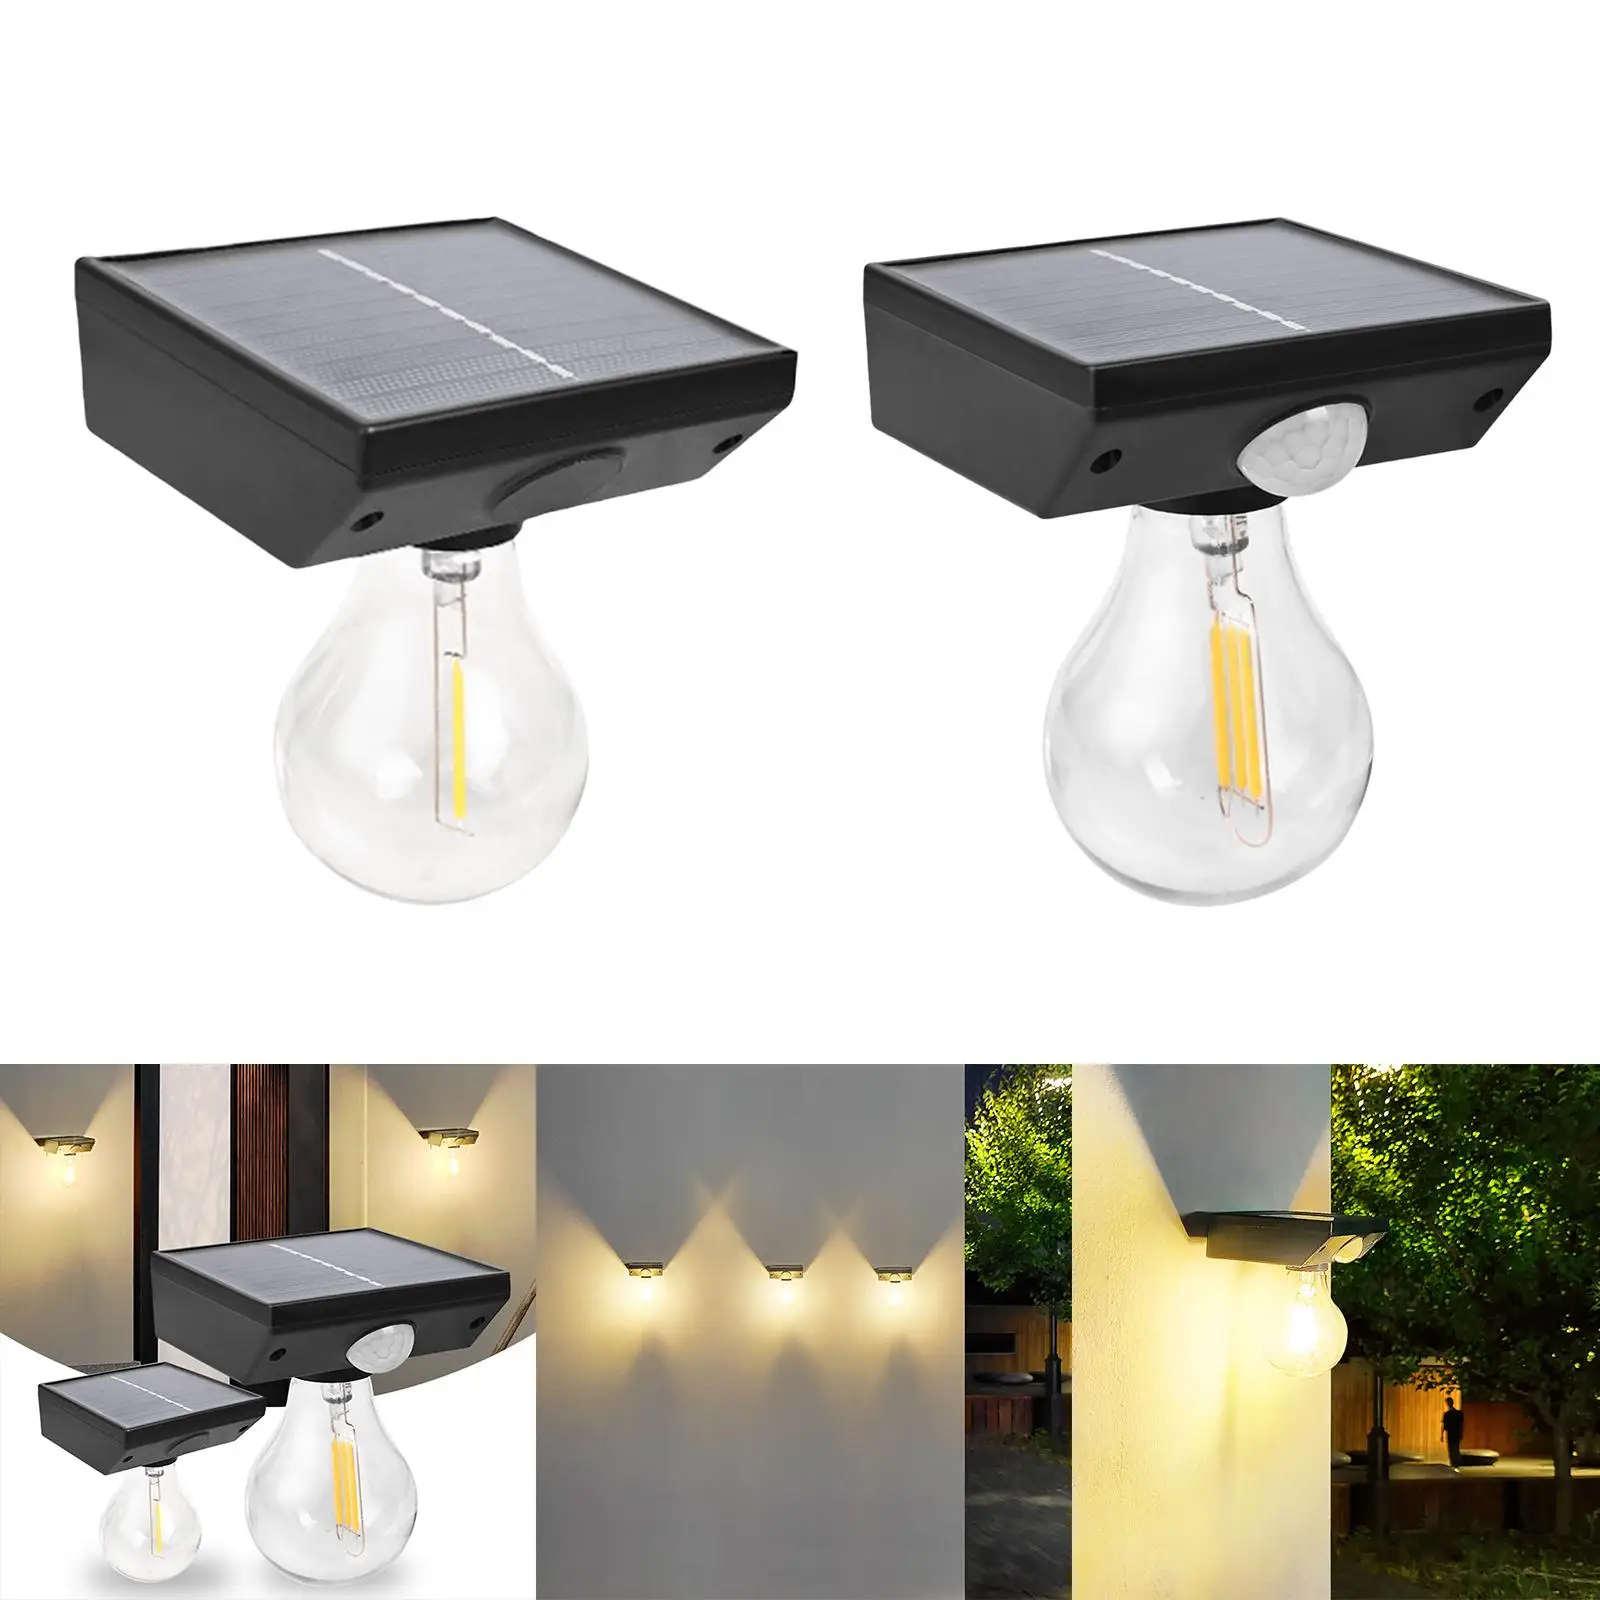 Waterproof Solar Lights Bulb Dusk to Dawn Accessories Powered Decorative Ball Bulb Lamp Lamps Bulbs for Fence Tent Hallway